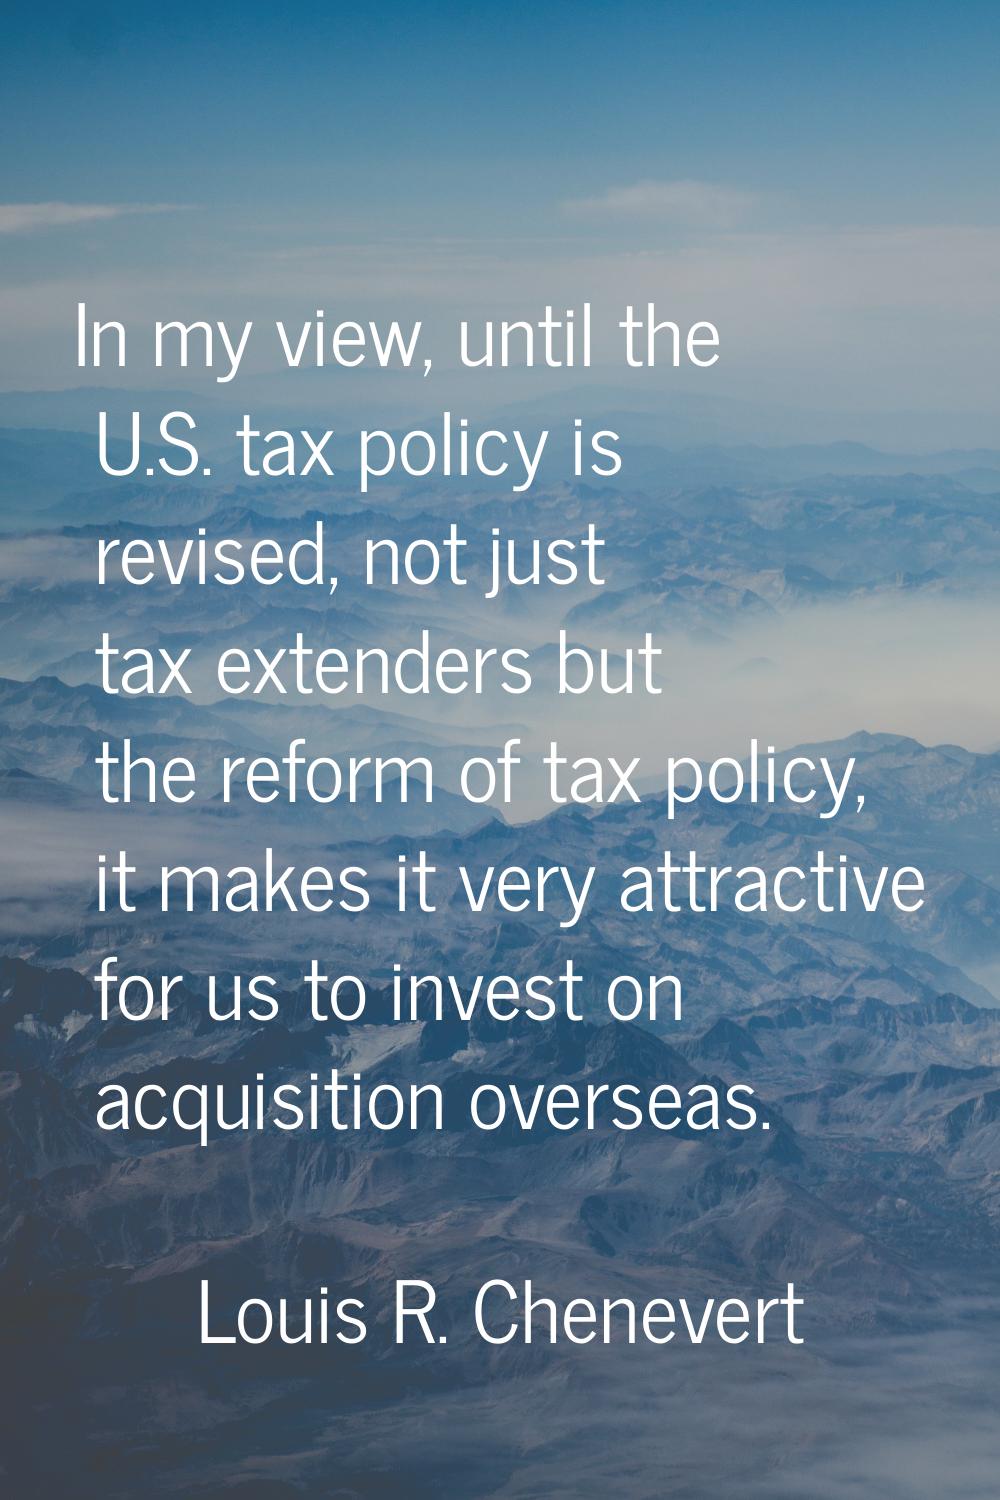 In my view, until the U.S. tax policy is revised, not just tax extenders but the reform of tax poli